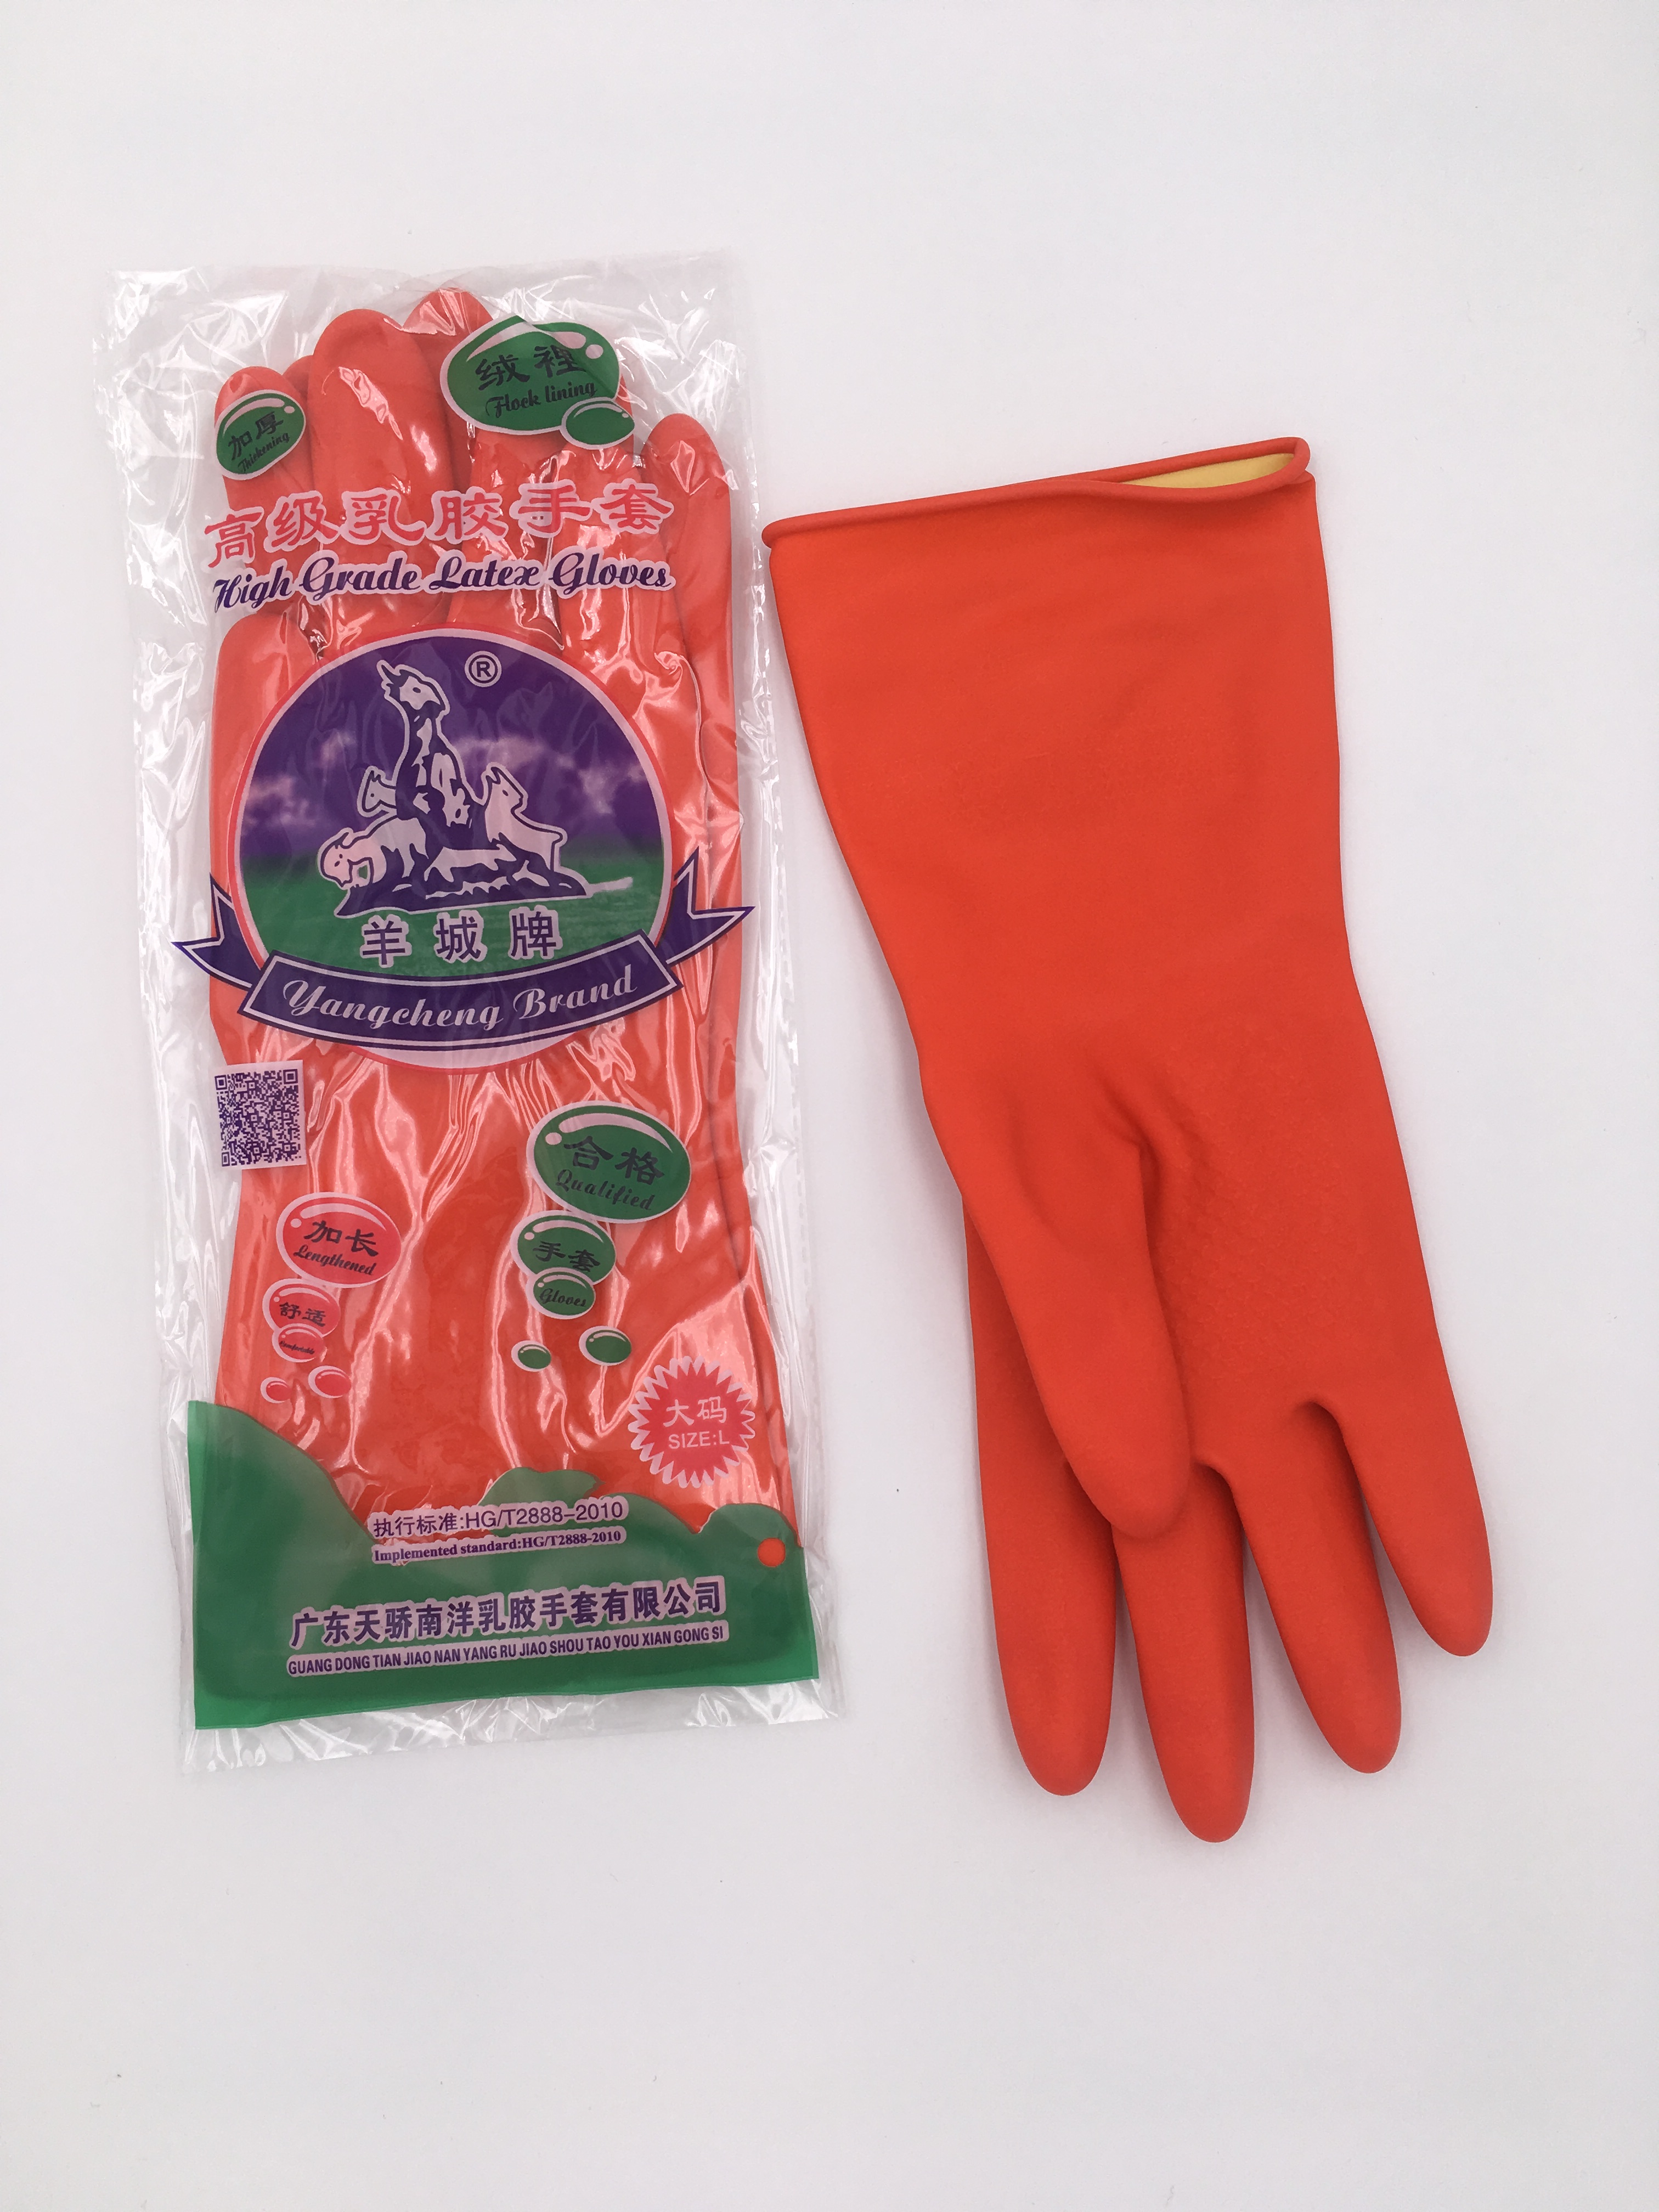 Genuine Yangcheng brand rubber / Latex / household gloves / dishwashing gloves, thickened beef tendon, acid resistant and durable